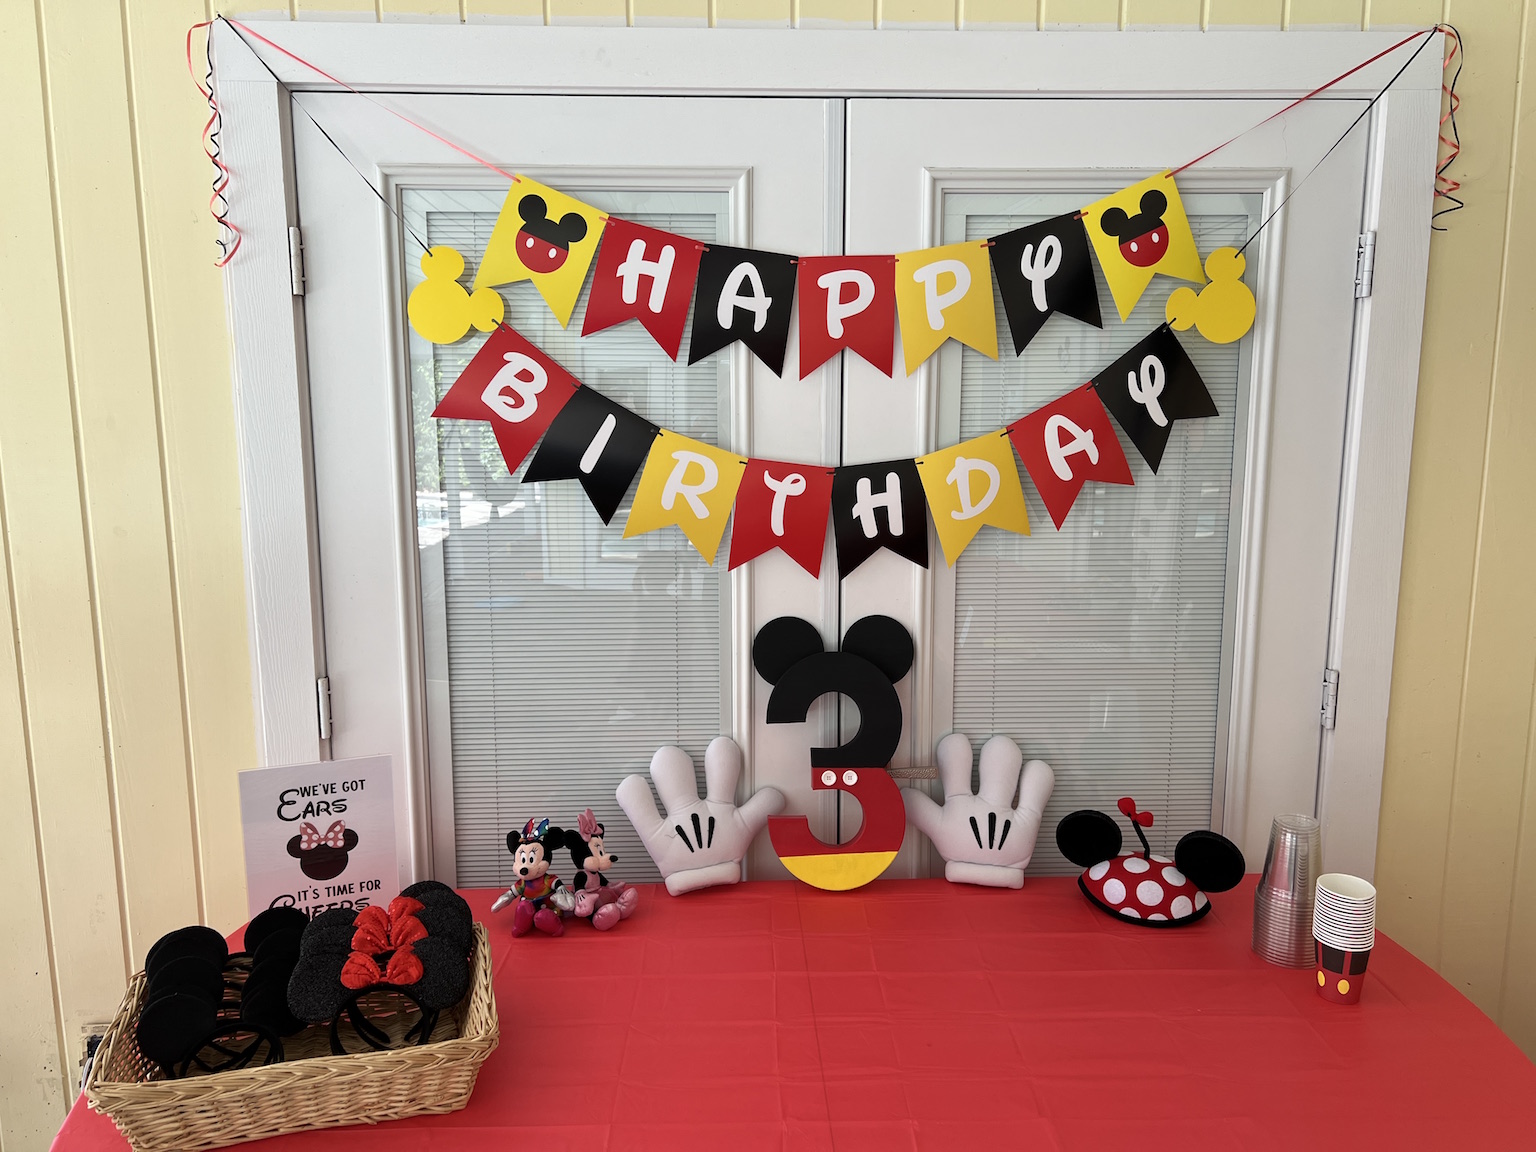 Micky Mouse Theme Birthday Party Decoration at home 